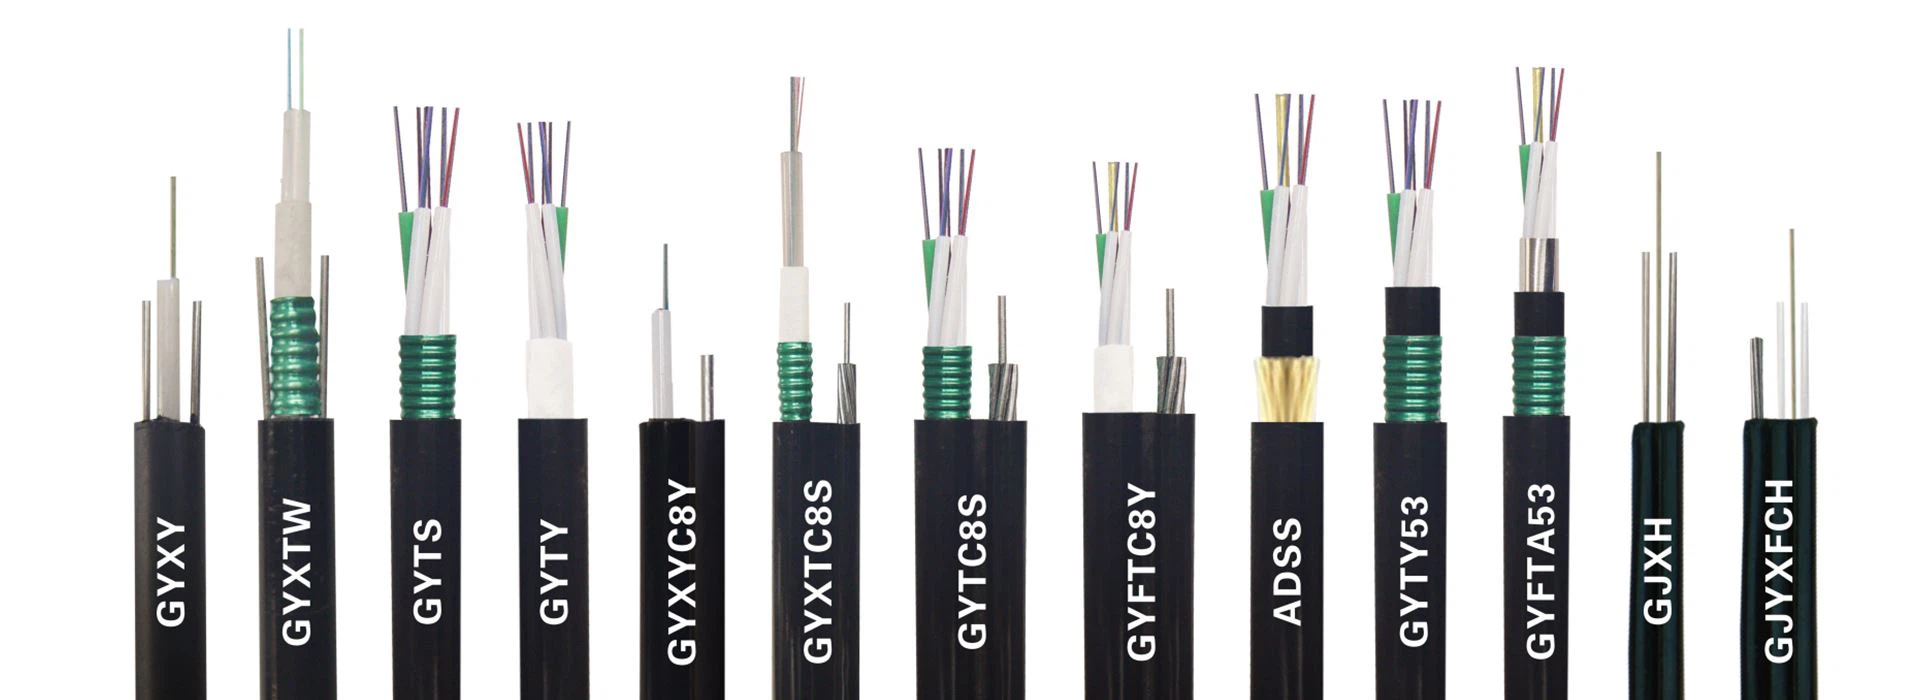 GYFTY33 Water-proof 8 Cores Single Mode G652D Fiber Optic Cable